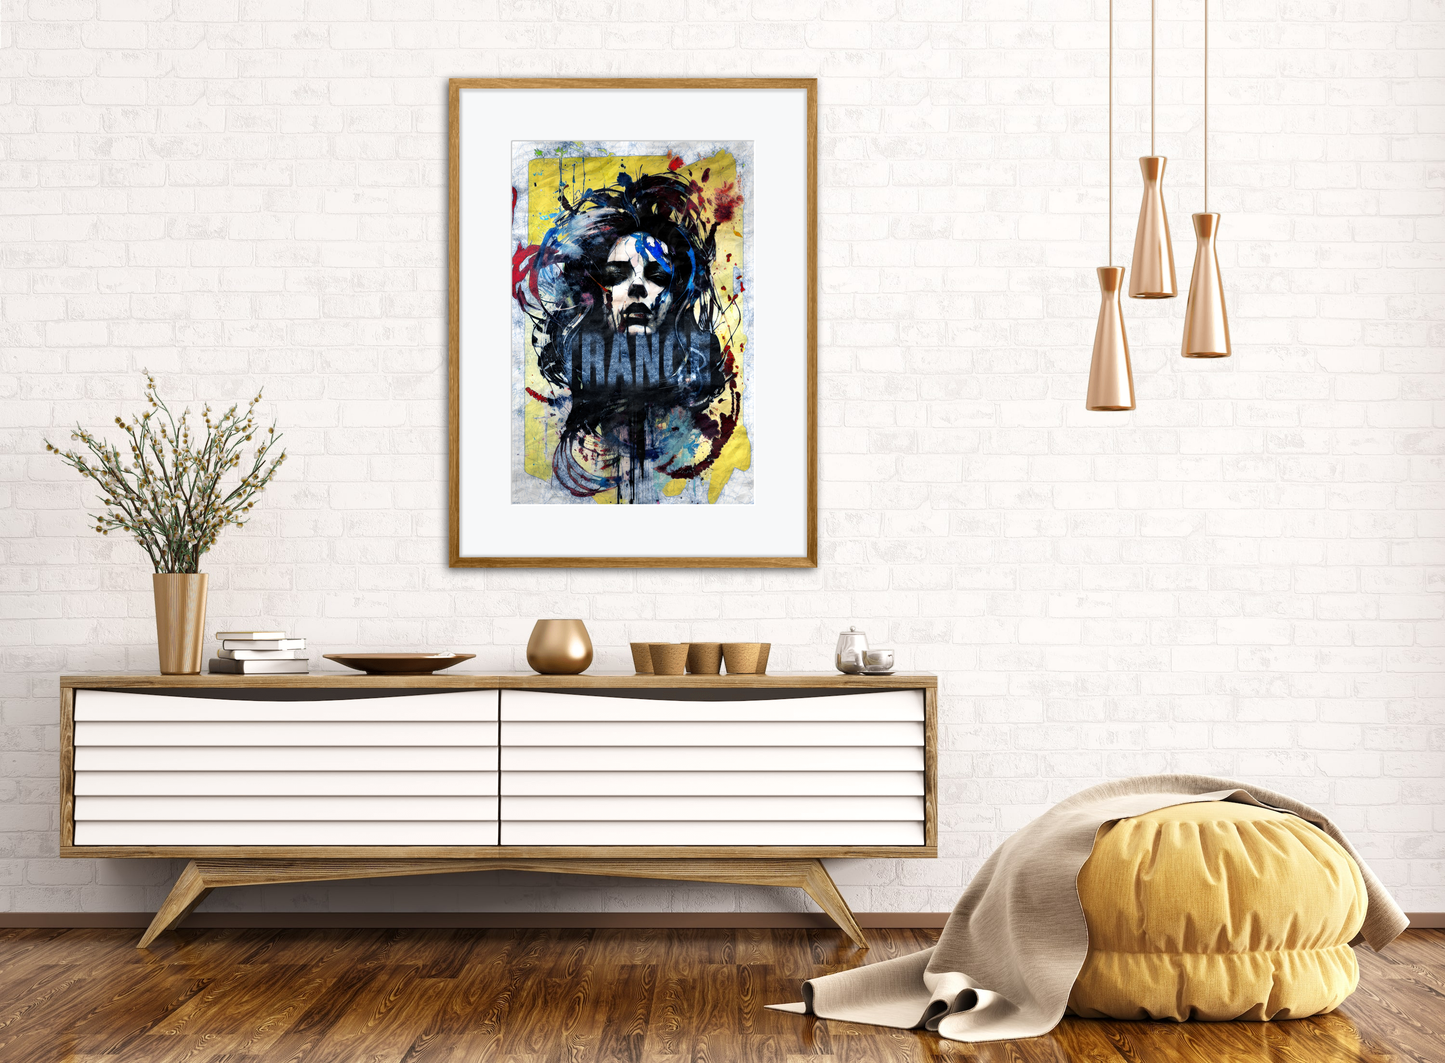 "TRANCE" digital art: Girl's portrait with blue pen lines and a distressed, vintage poster feel